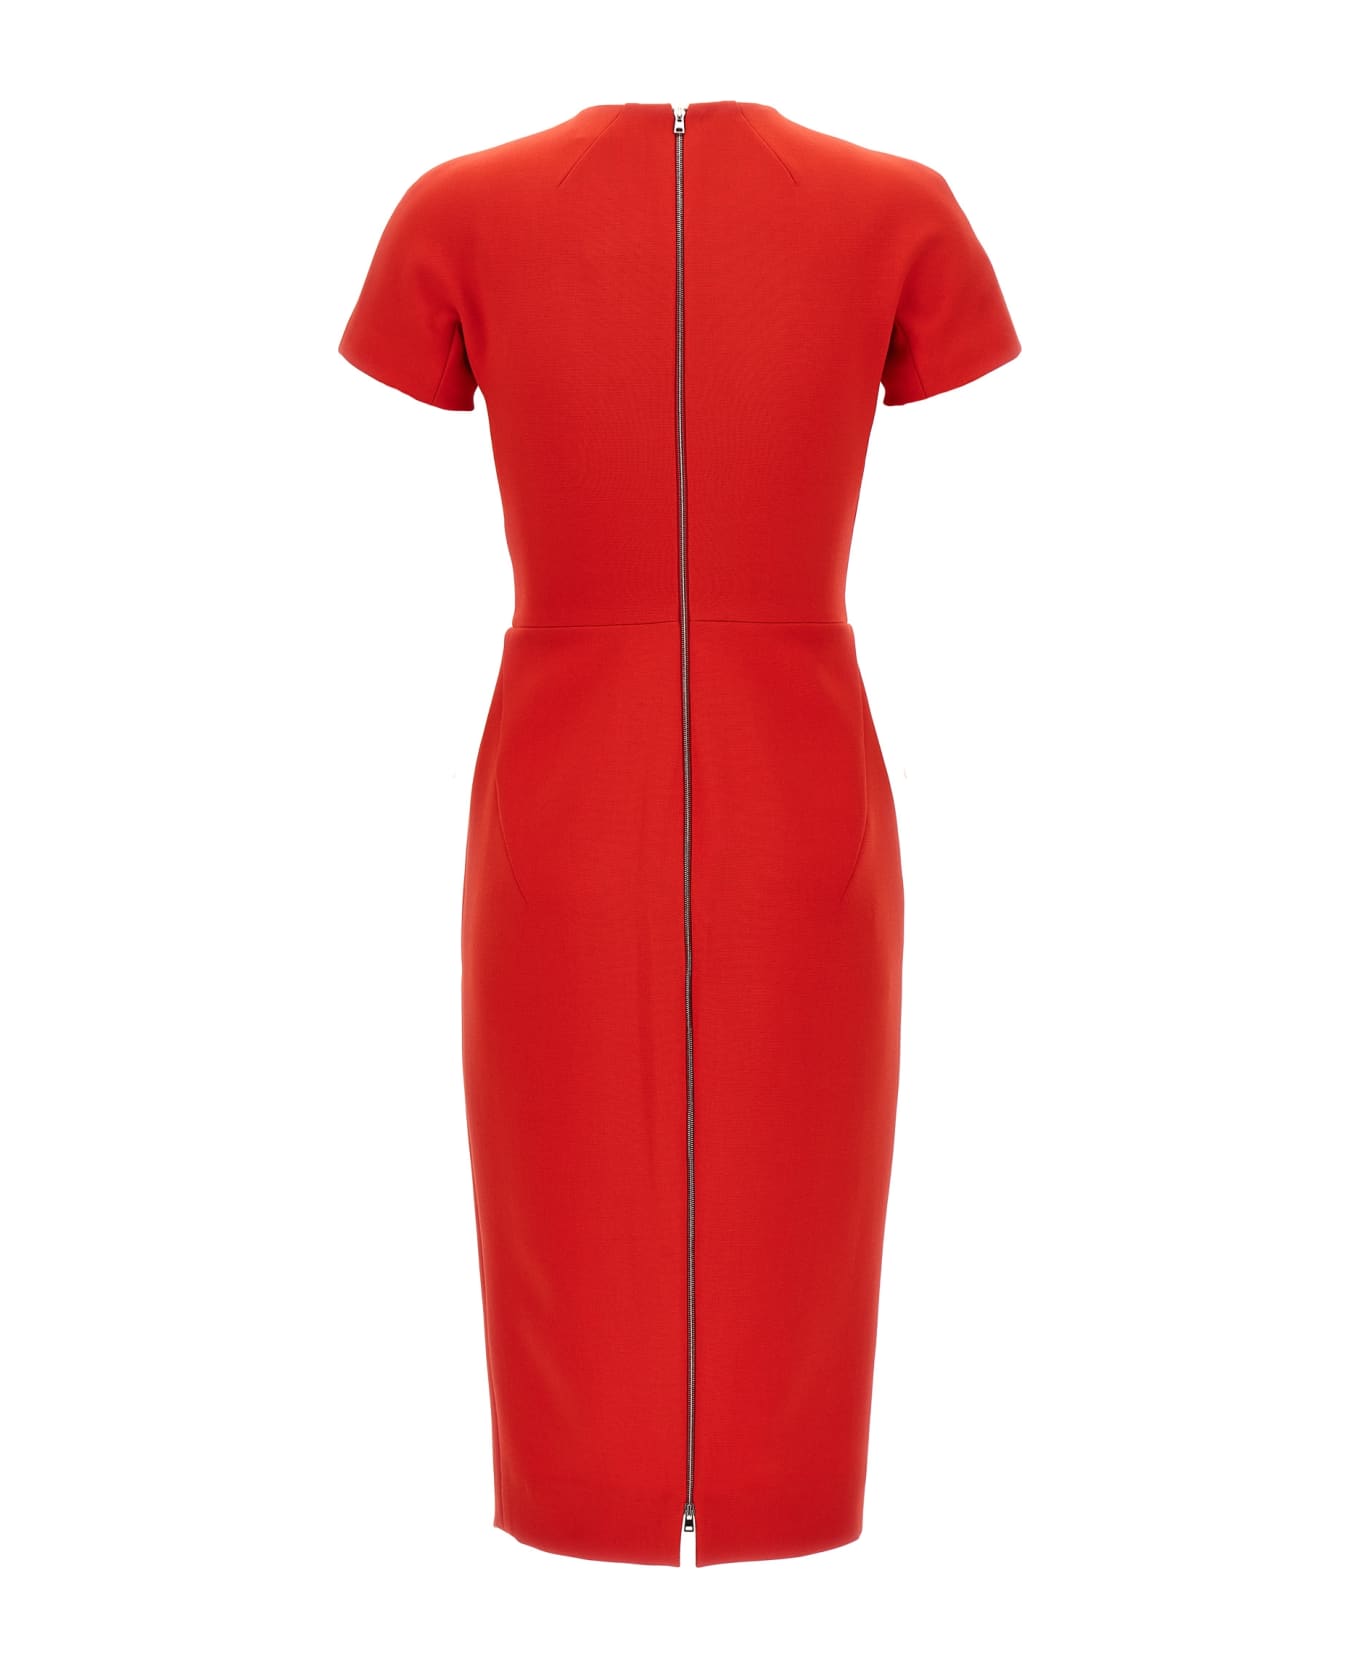 Victoria Beckham 'fitted T-shirt' Dress - Red ワンピース＆ドレス